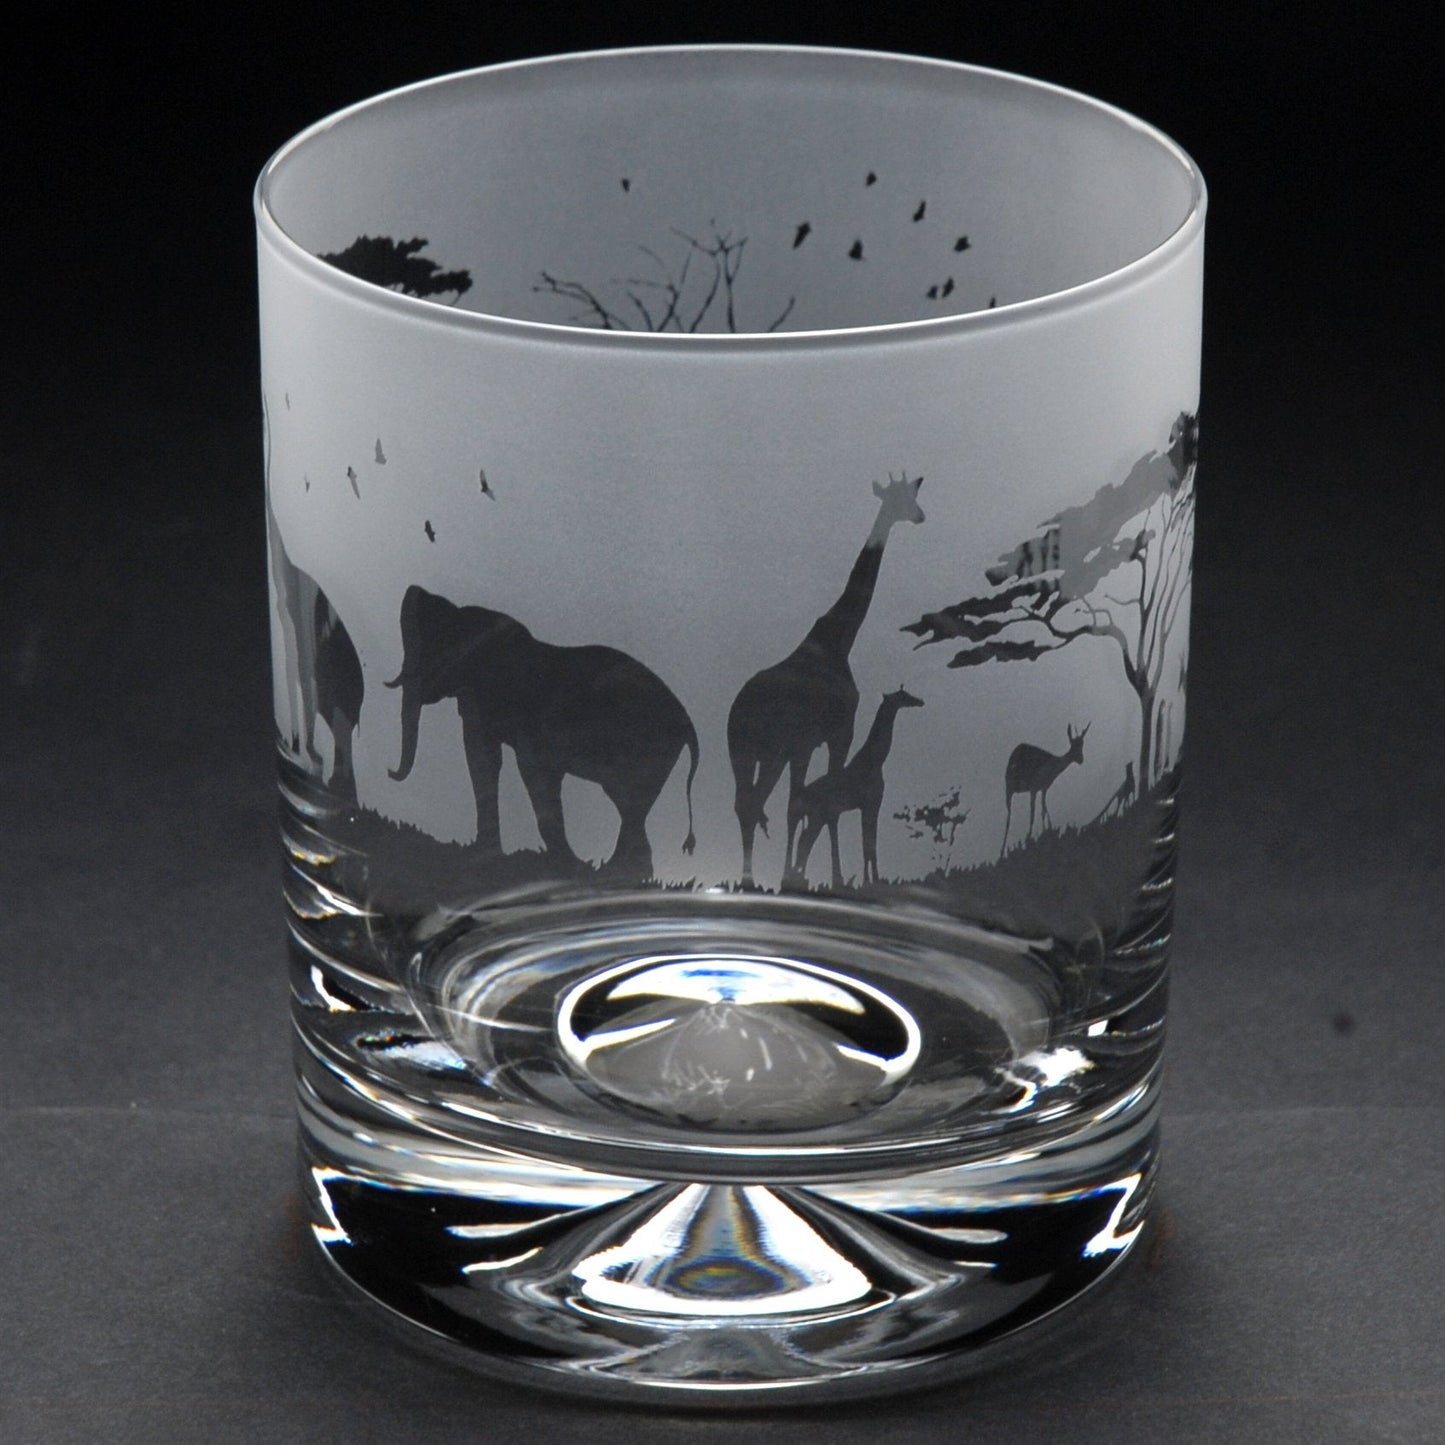 Safari Whiskey Tumbler Glass - Hand Etched/Engraved Gift